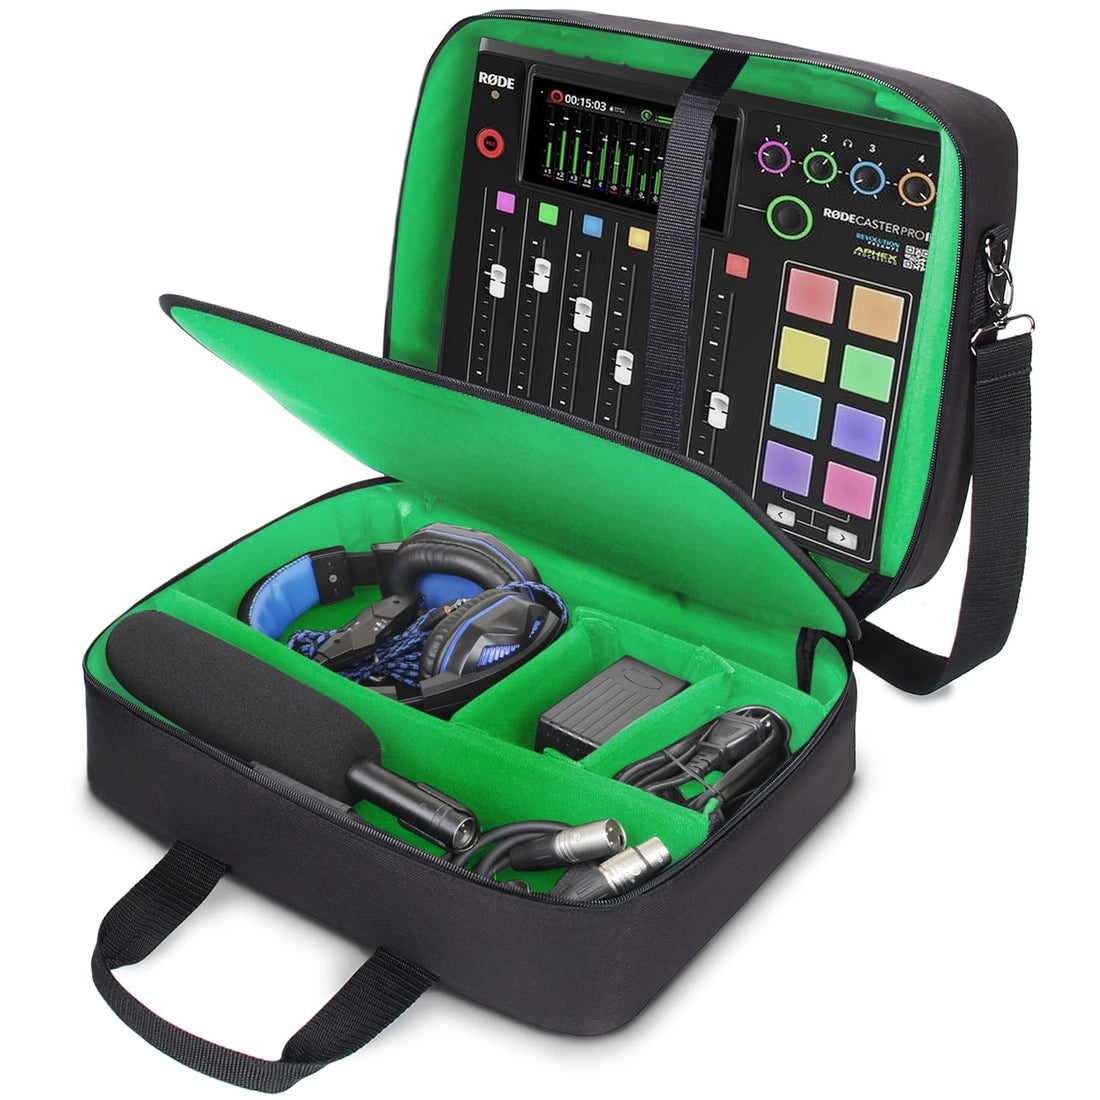 USA GEAR Audio Mixer Case - Podcast Mixer Travel Case with Scratch-Resistant Interior & Customizable Storage - Compatible with RODECaster Pro, RODECaster Pro II, Microphones and More Equipment (Green)